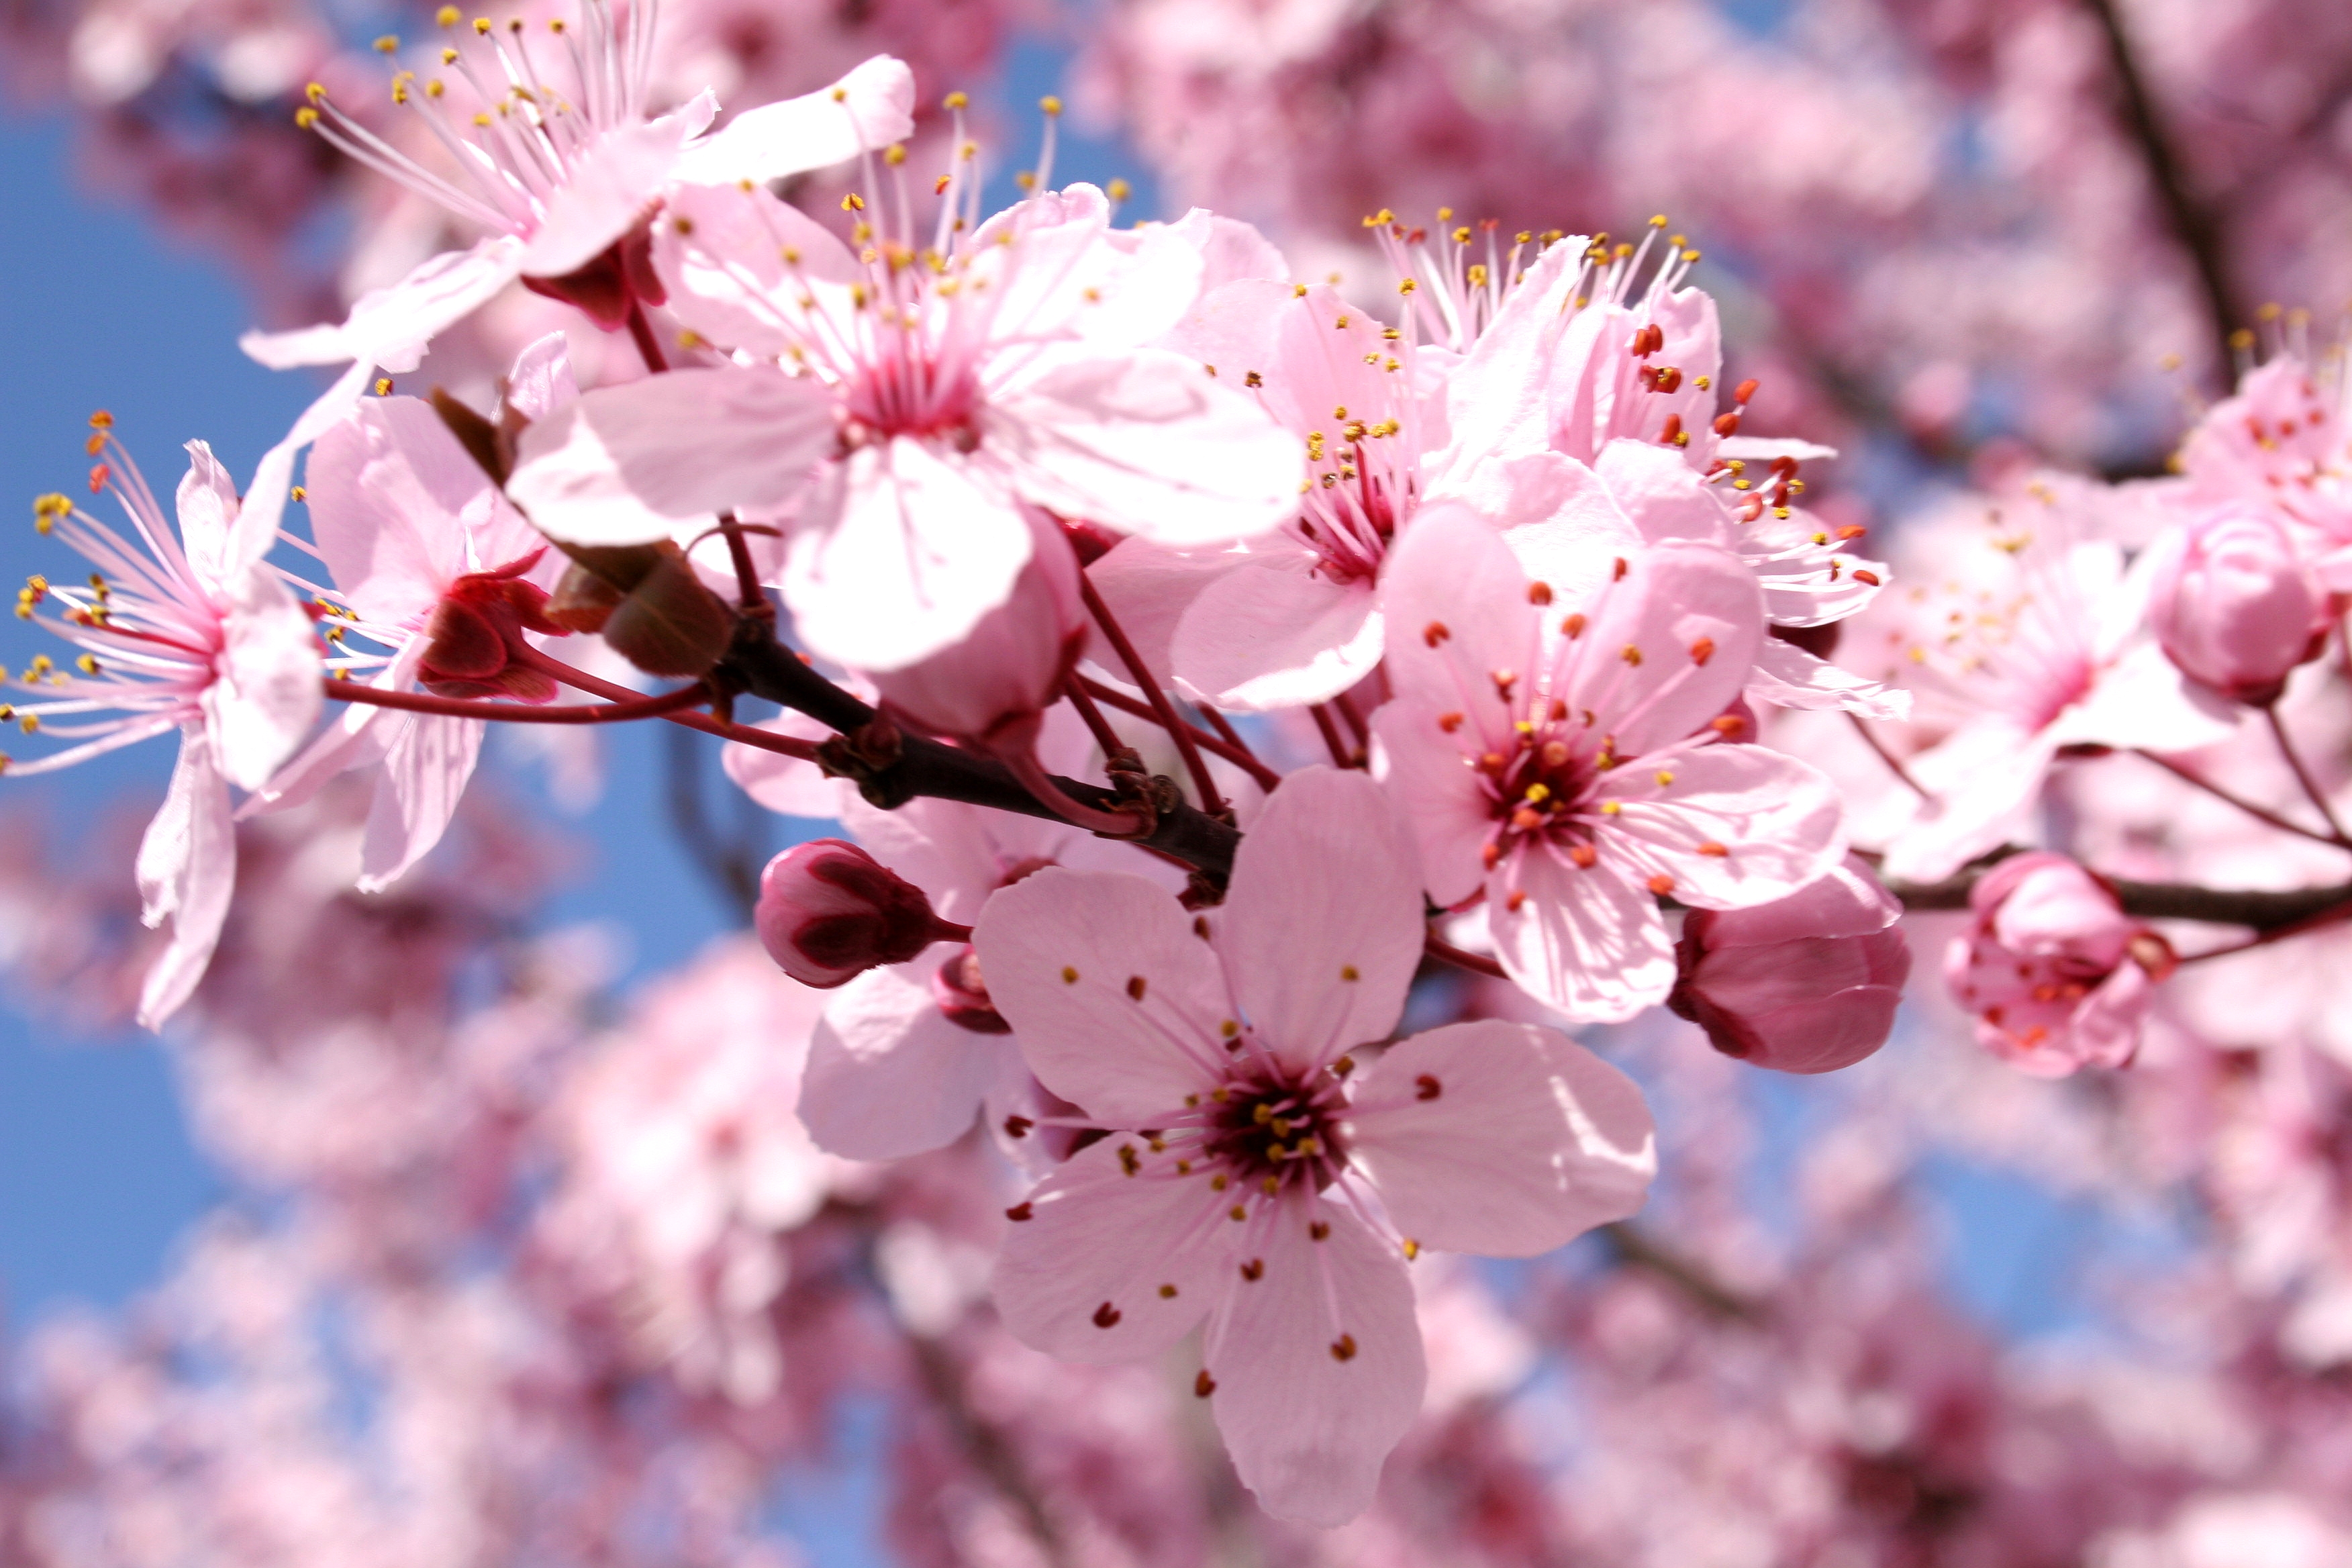 Photos] Awesome Pink Blossom | Phong Photography